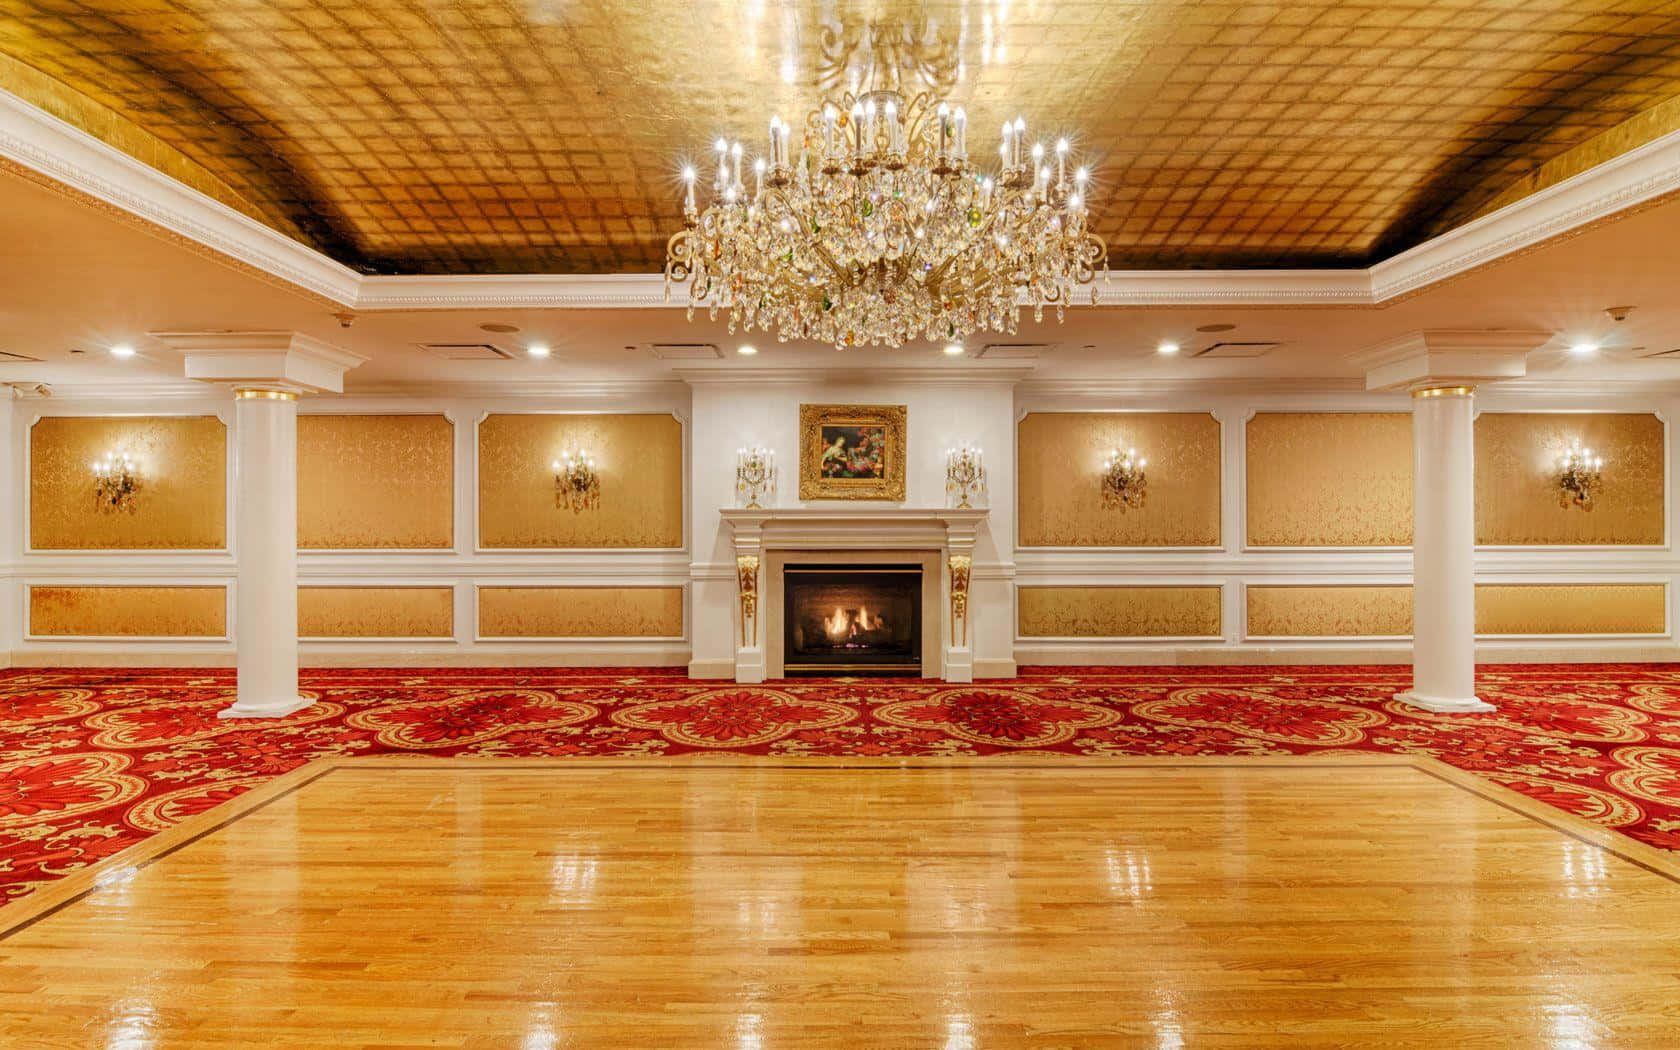 A Large Room With A Fireplace And Red Carpet